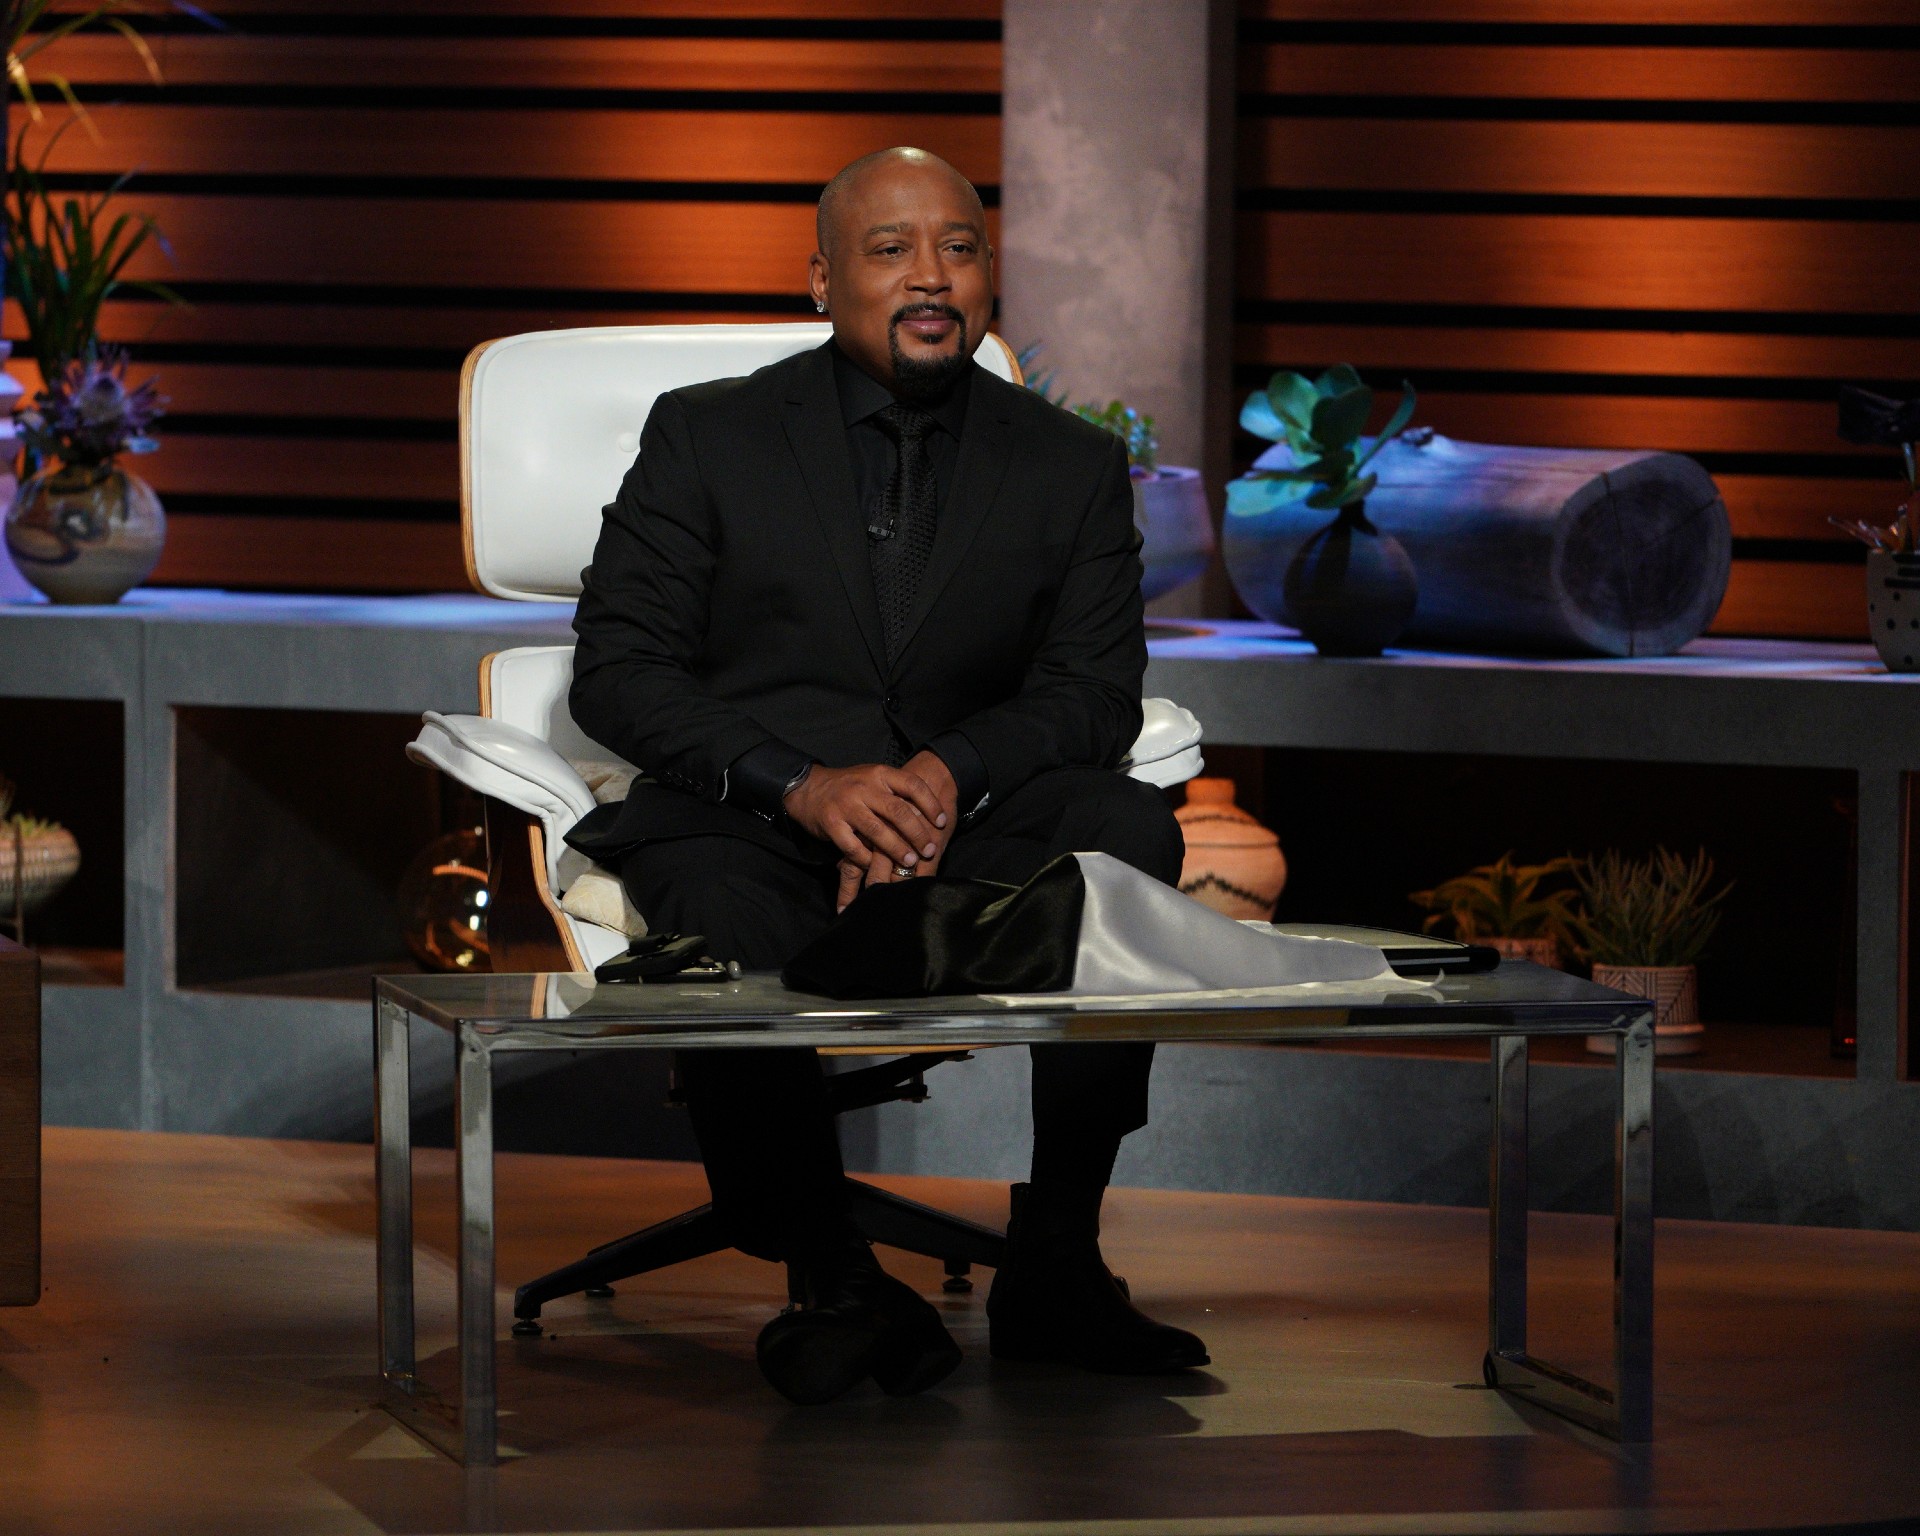 Daymond John sits in a chair on the set of Shark Tank